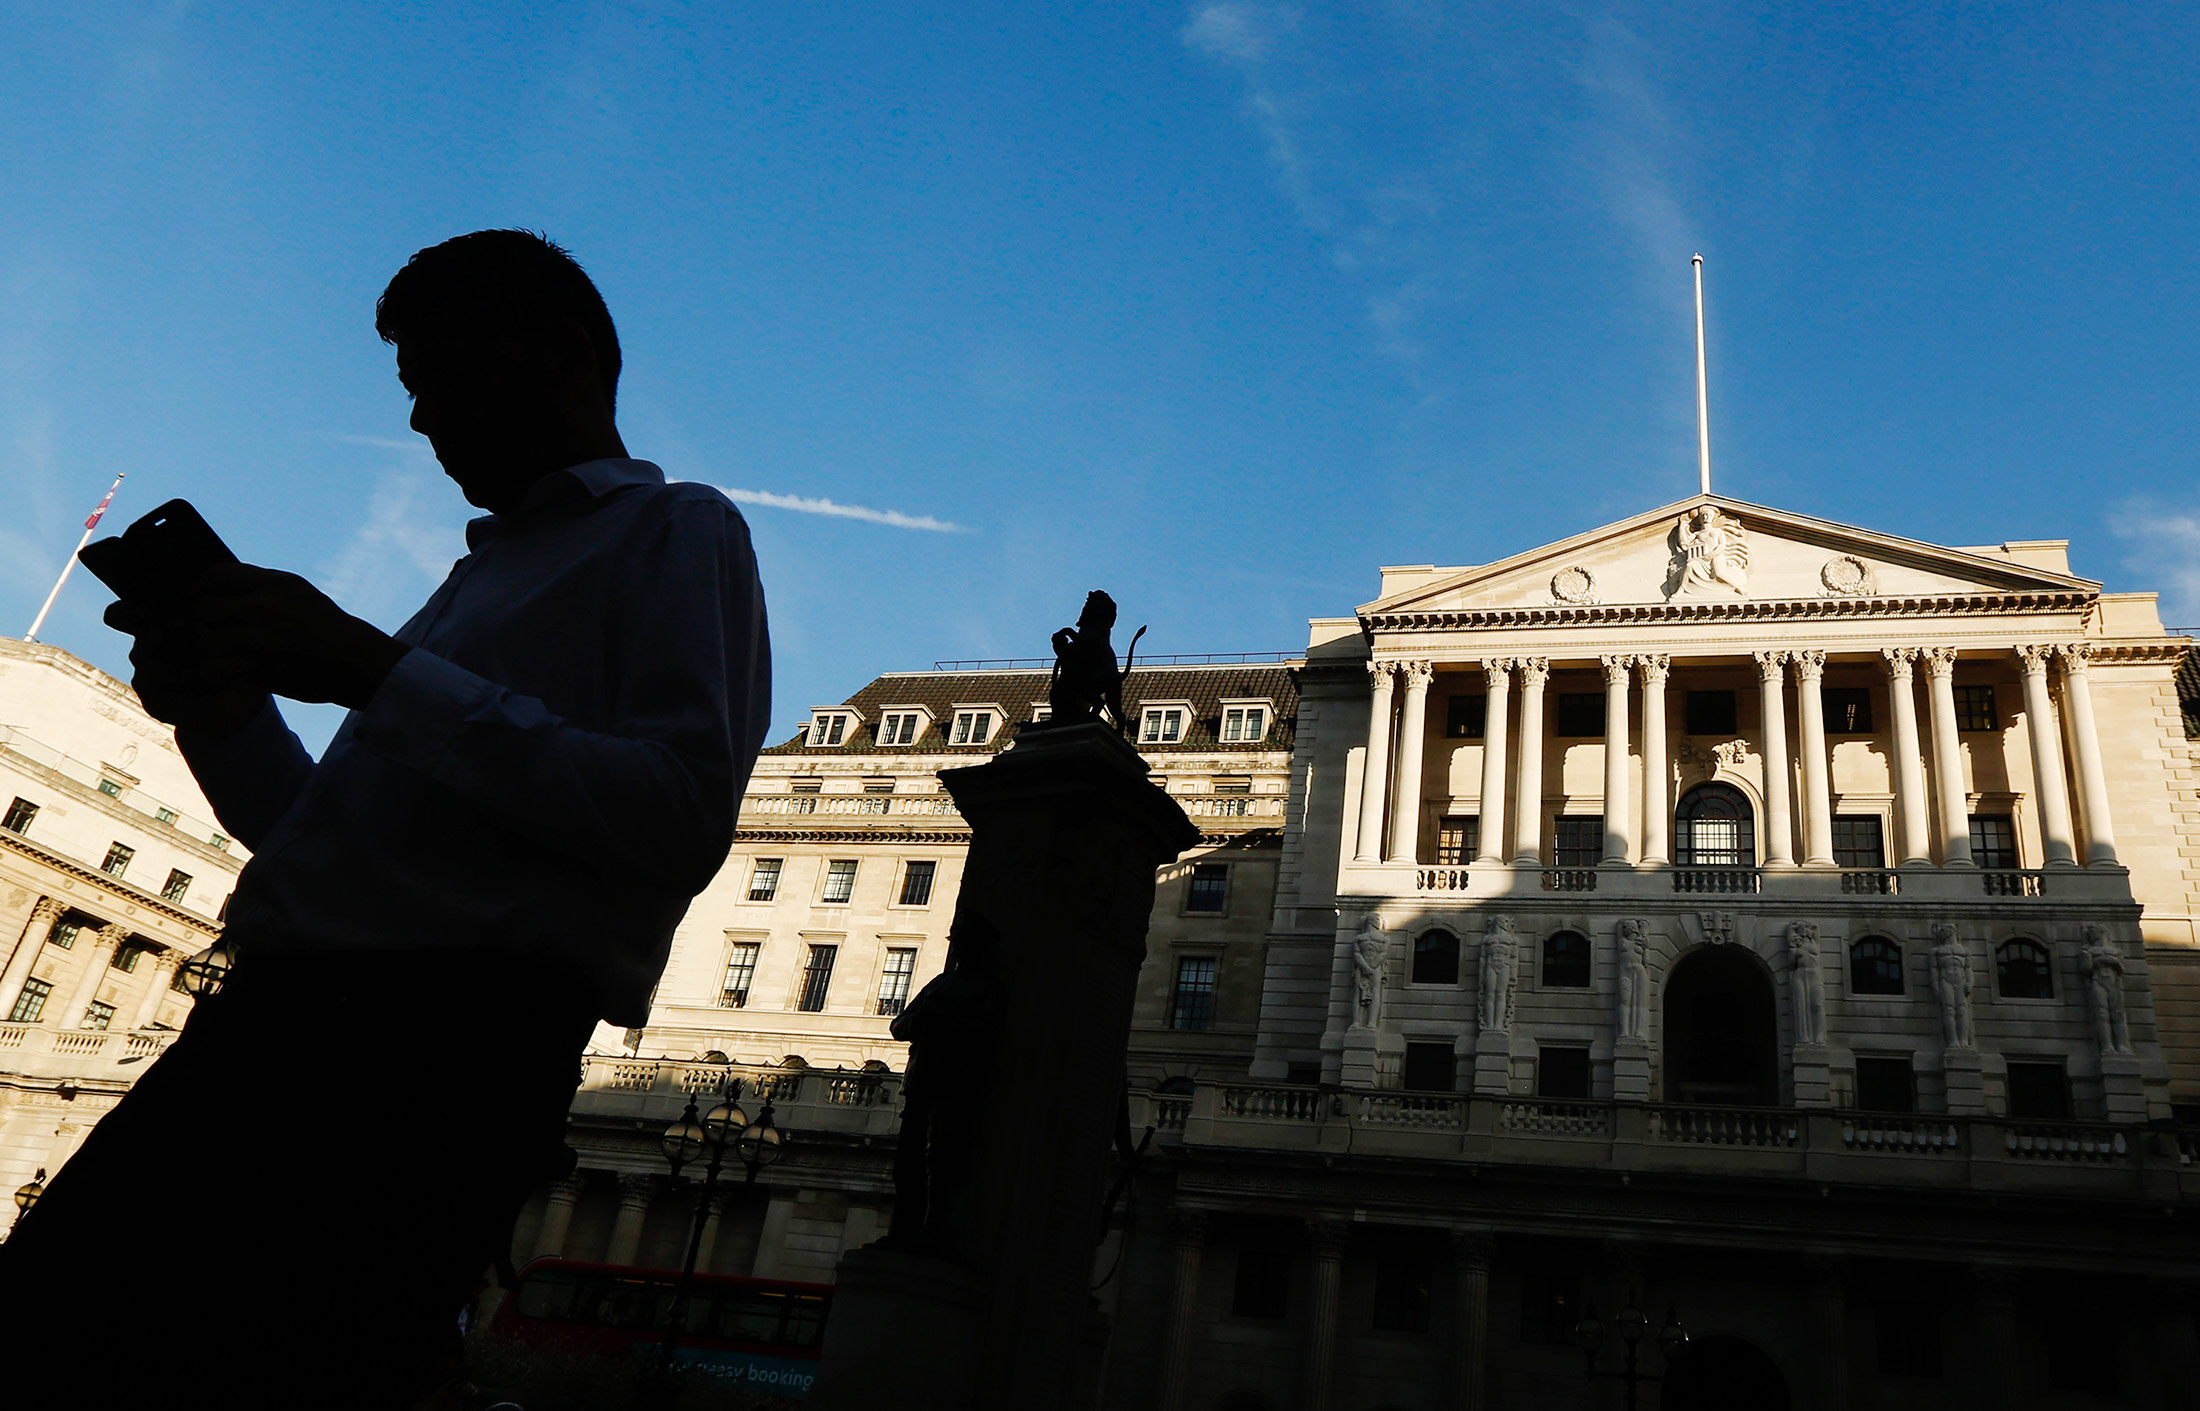 A man looks at his smartphone as he walks past the Bank of England (BOE) in the City of London, U.K., on Tuesday, Sept. 13, 2016. BOE officials announce their next interest rate decision on Thursday, when they are forecast to keep policy unchanged as they assess the outlook for the economy since the Brexit vote.
